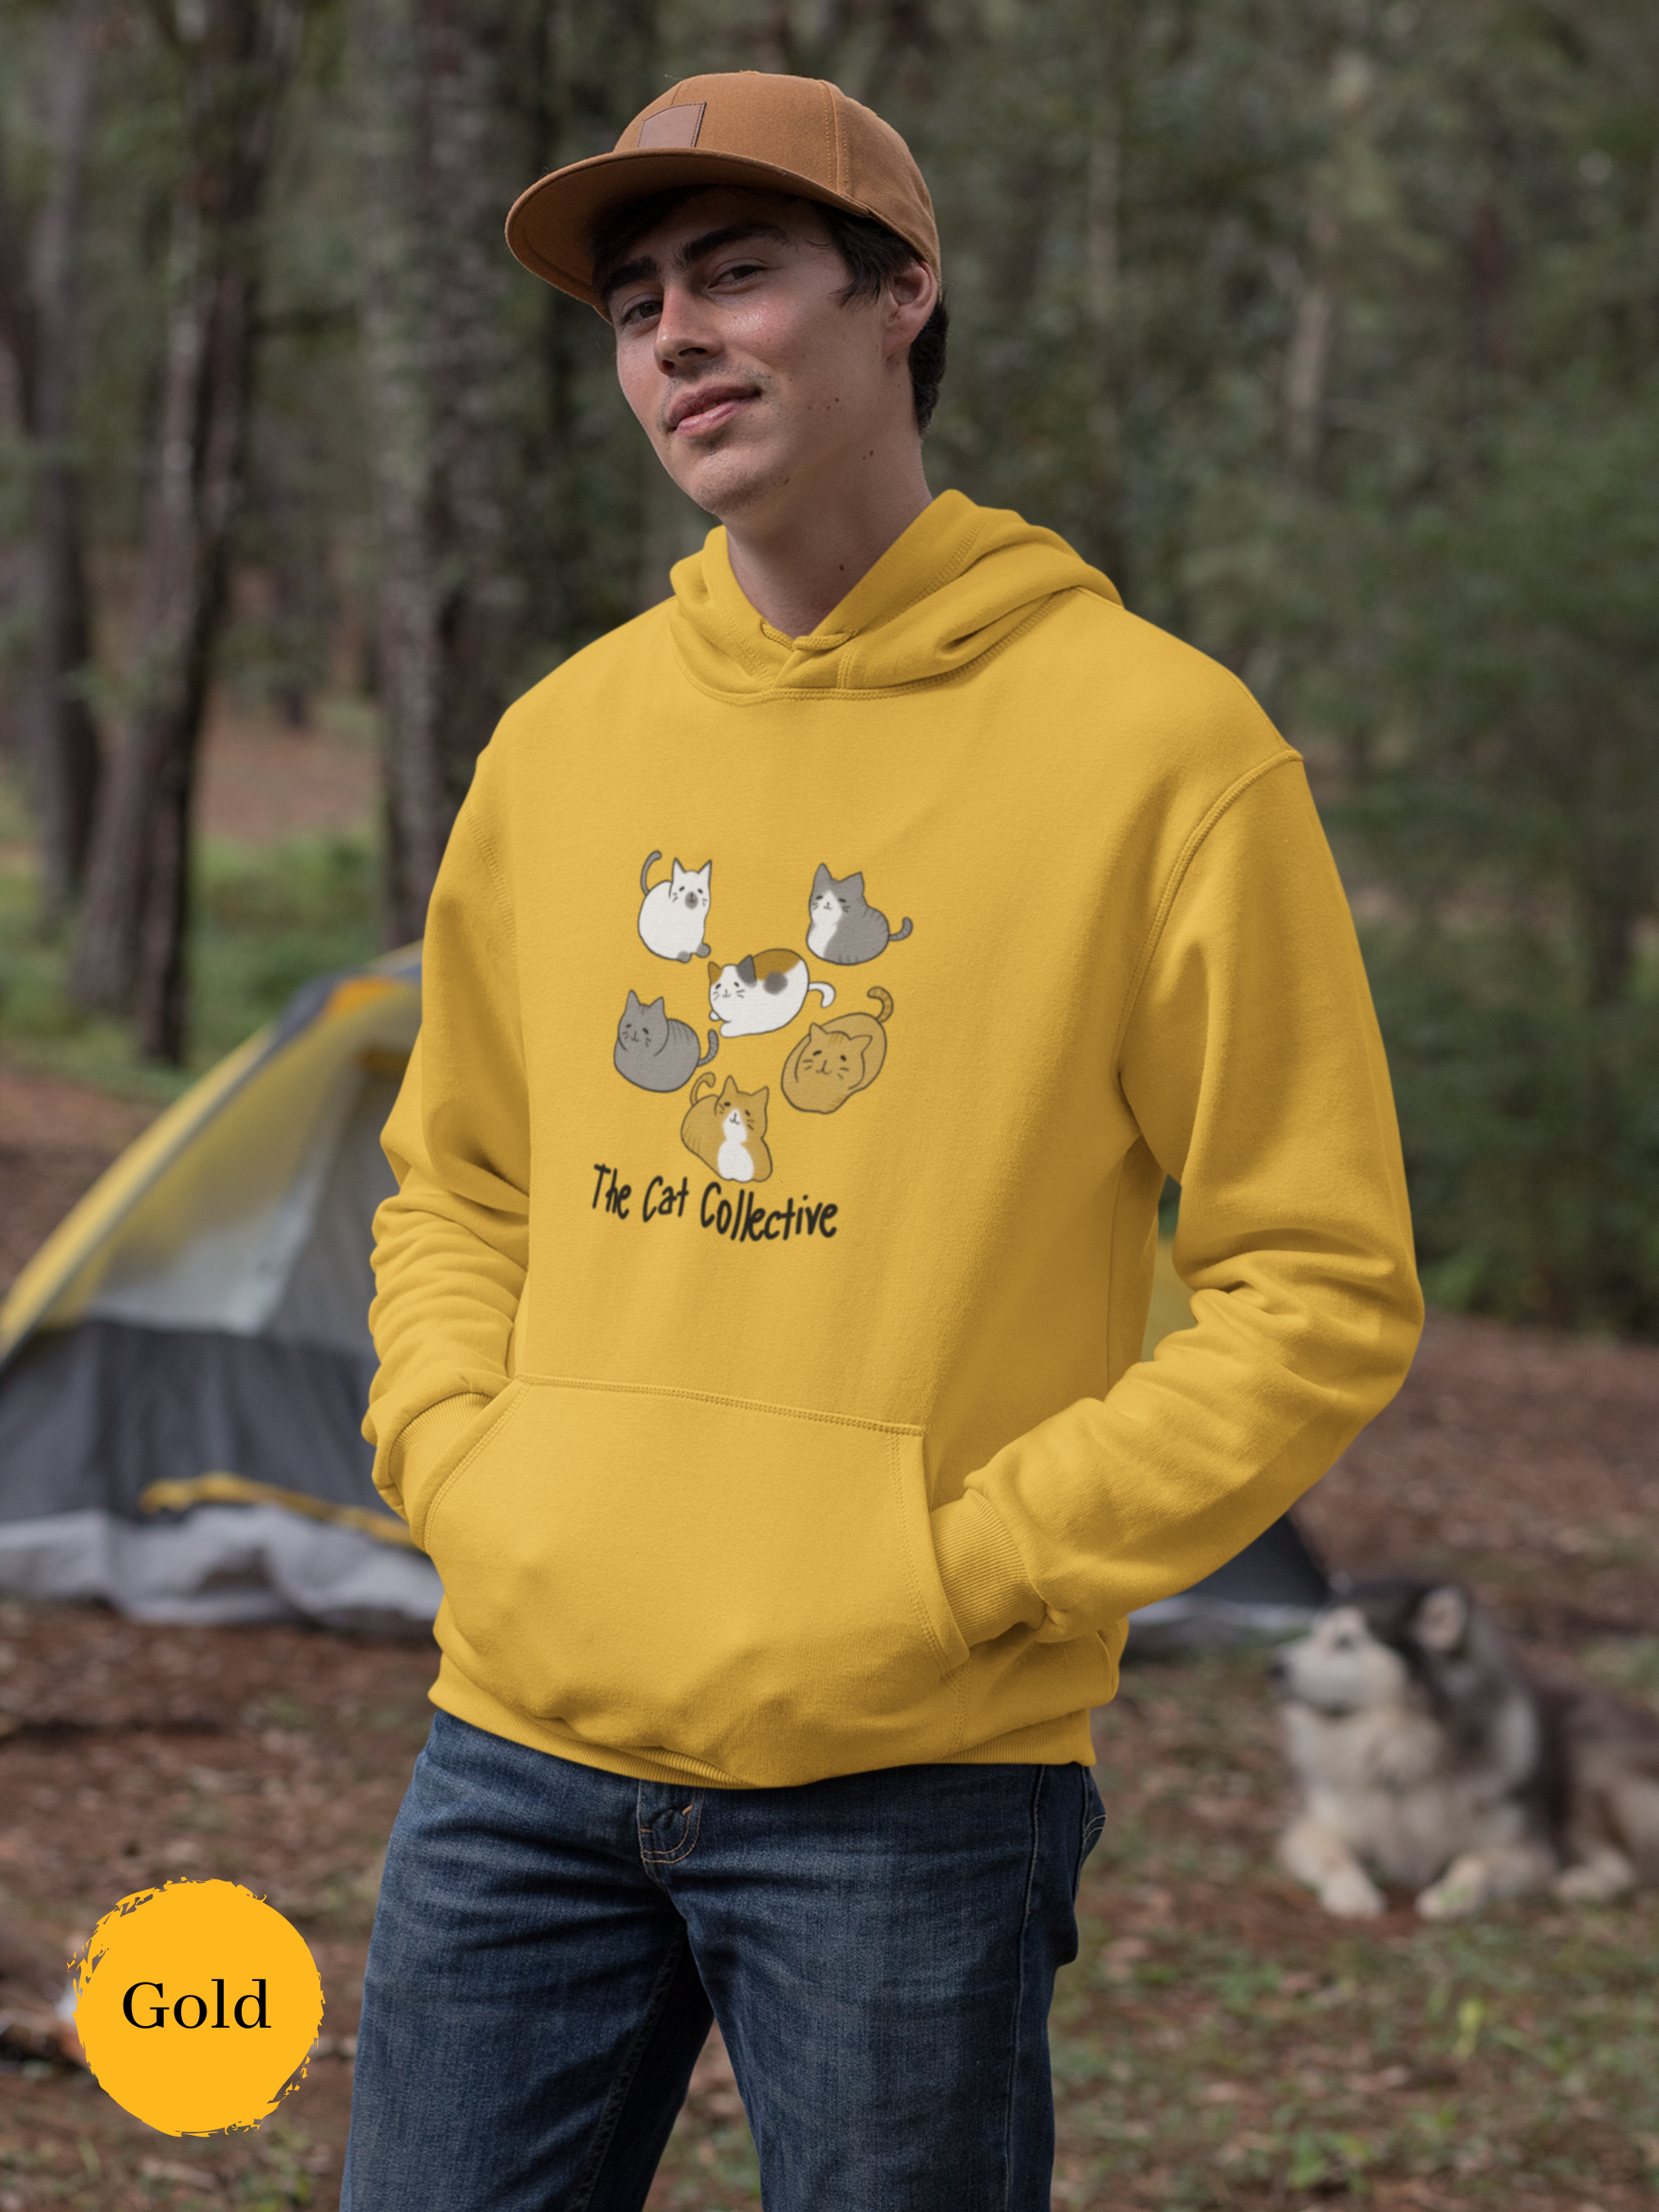 Cat Hoodie: The Cat Collective - Cute Cat Artwork for Feline Lovers and Cat Hoodie Enthusiasts